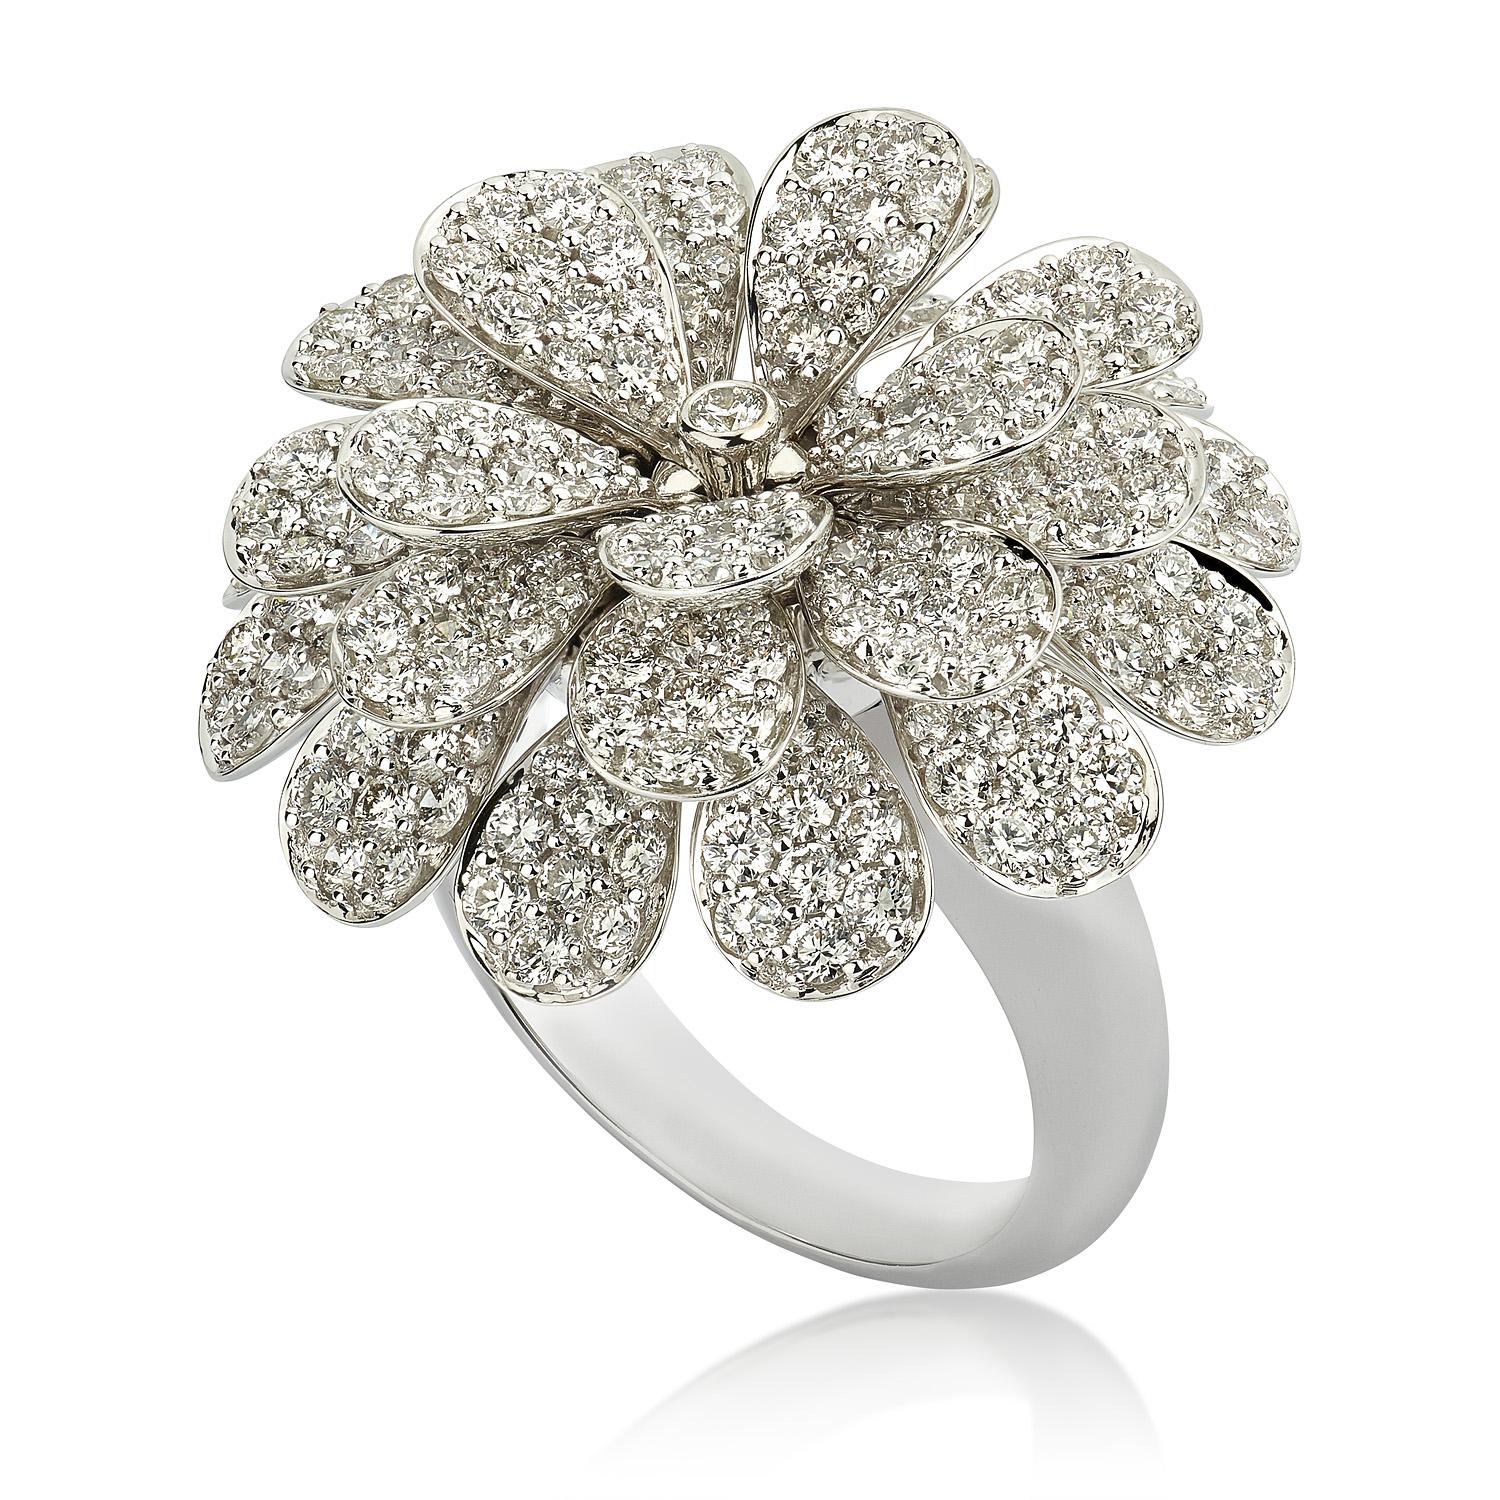 The Secret Garden collection by Hueb is inspired by the flowers that bloom in all its wilderness in the tropical gardens of Brazil. The ring showcases closely set leaves of a flower that spurt from a gold band at the center of the ring. Set in 18K